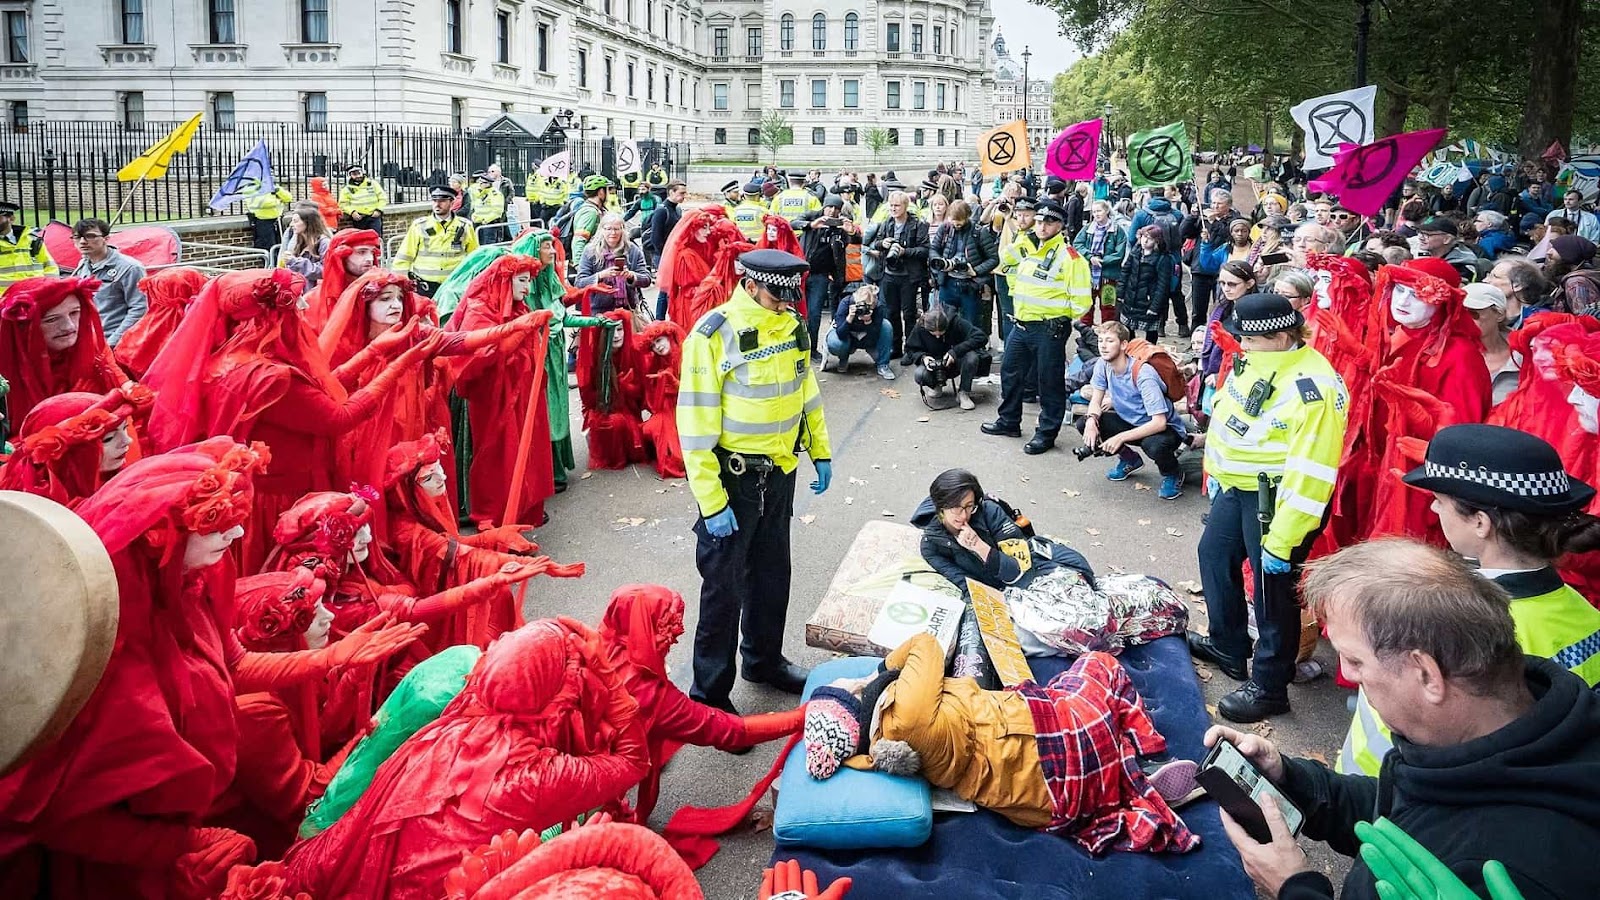 Red rebels surround police during a former UK rebellion.